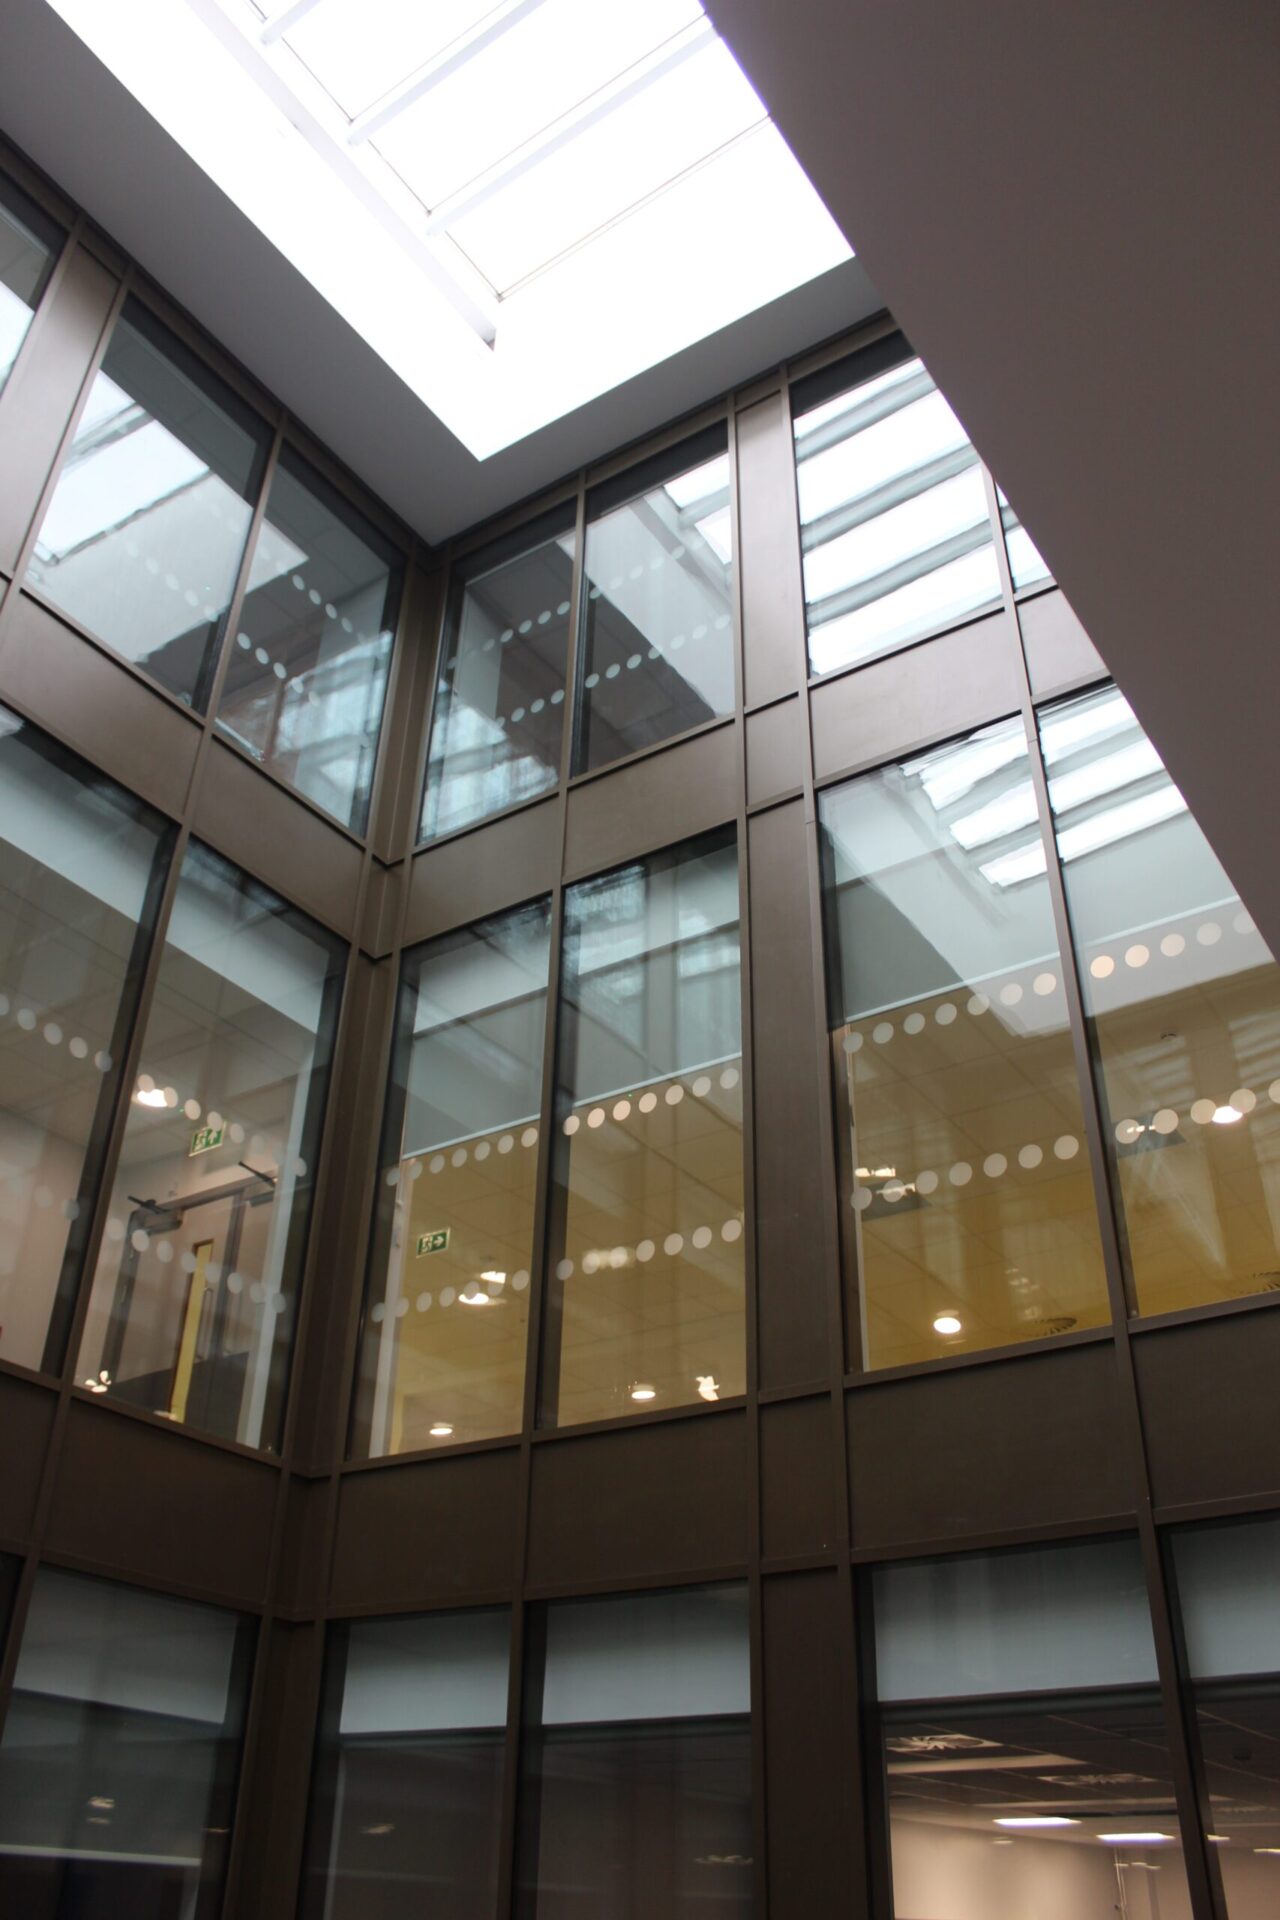 A triple-height atrium is the centrepiece of the building's reception